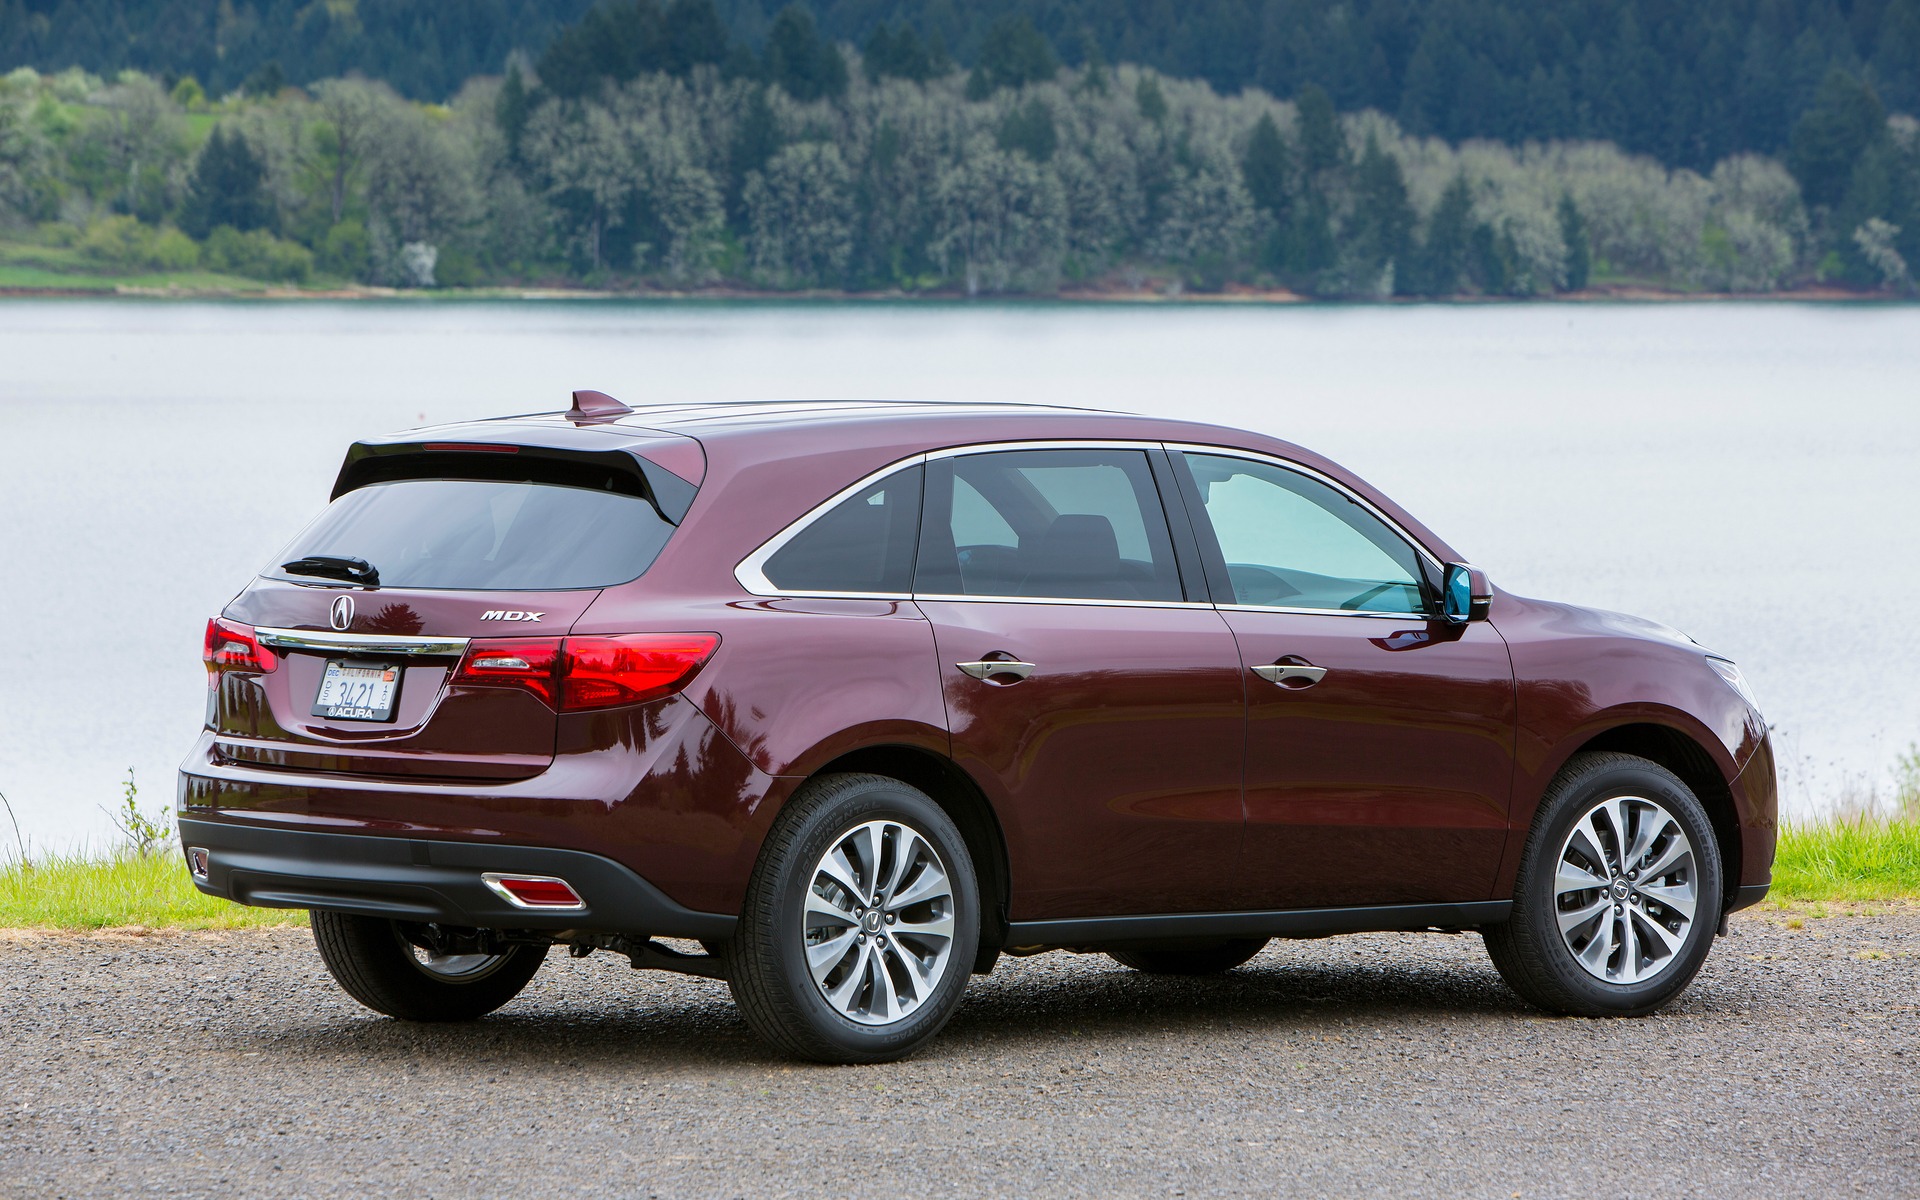 In terms of style, the MDX’s new look is doing wonders for it.